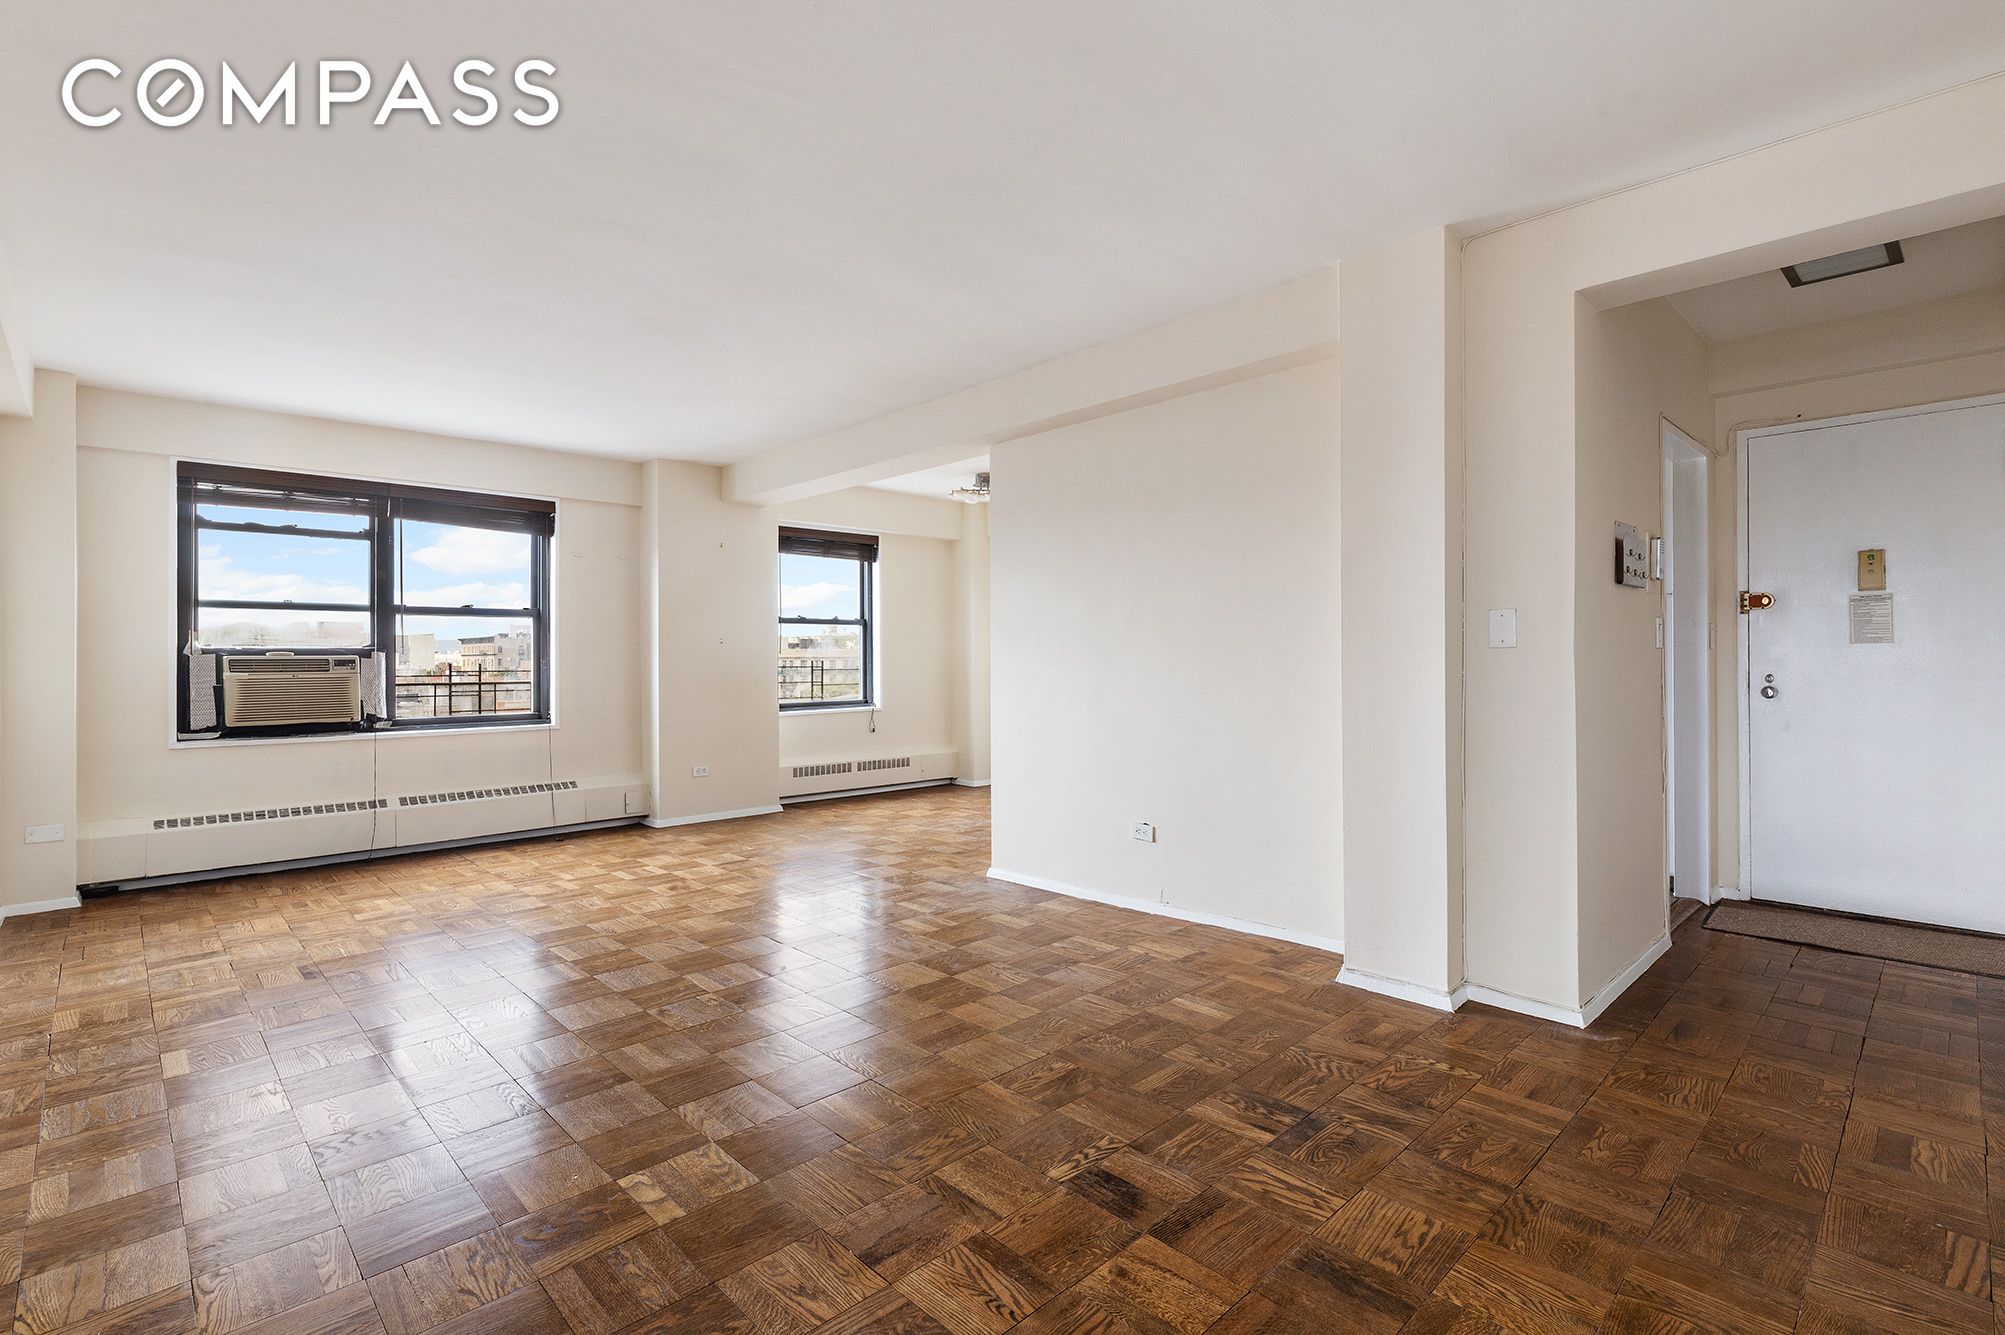 345 West 145th Street 11A3, Hamilton Heights, Upper Manhattan, NYC - 3 Bedrooms  
1.5 Bathrooms  
5 Rooms - 